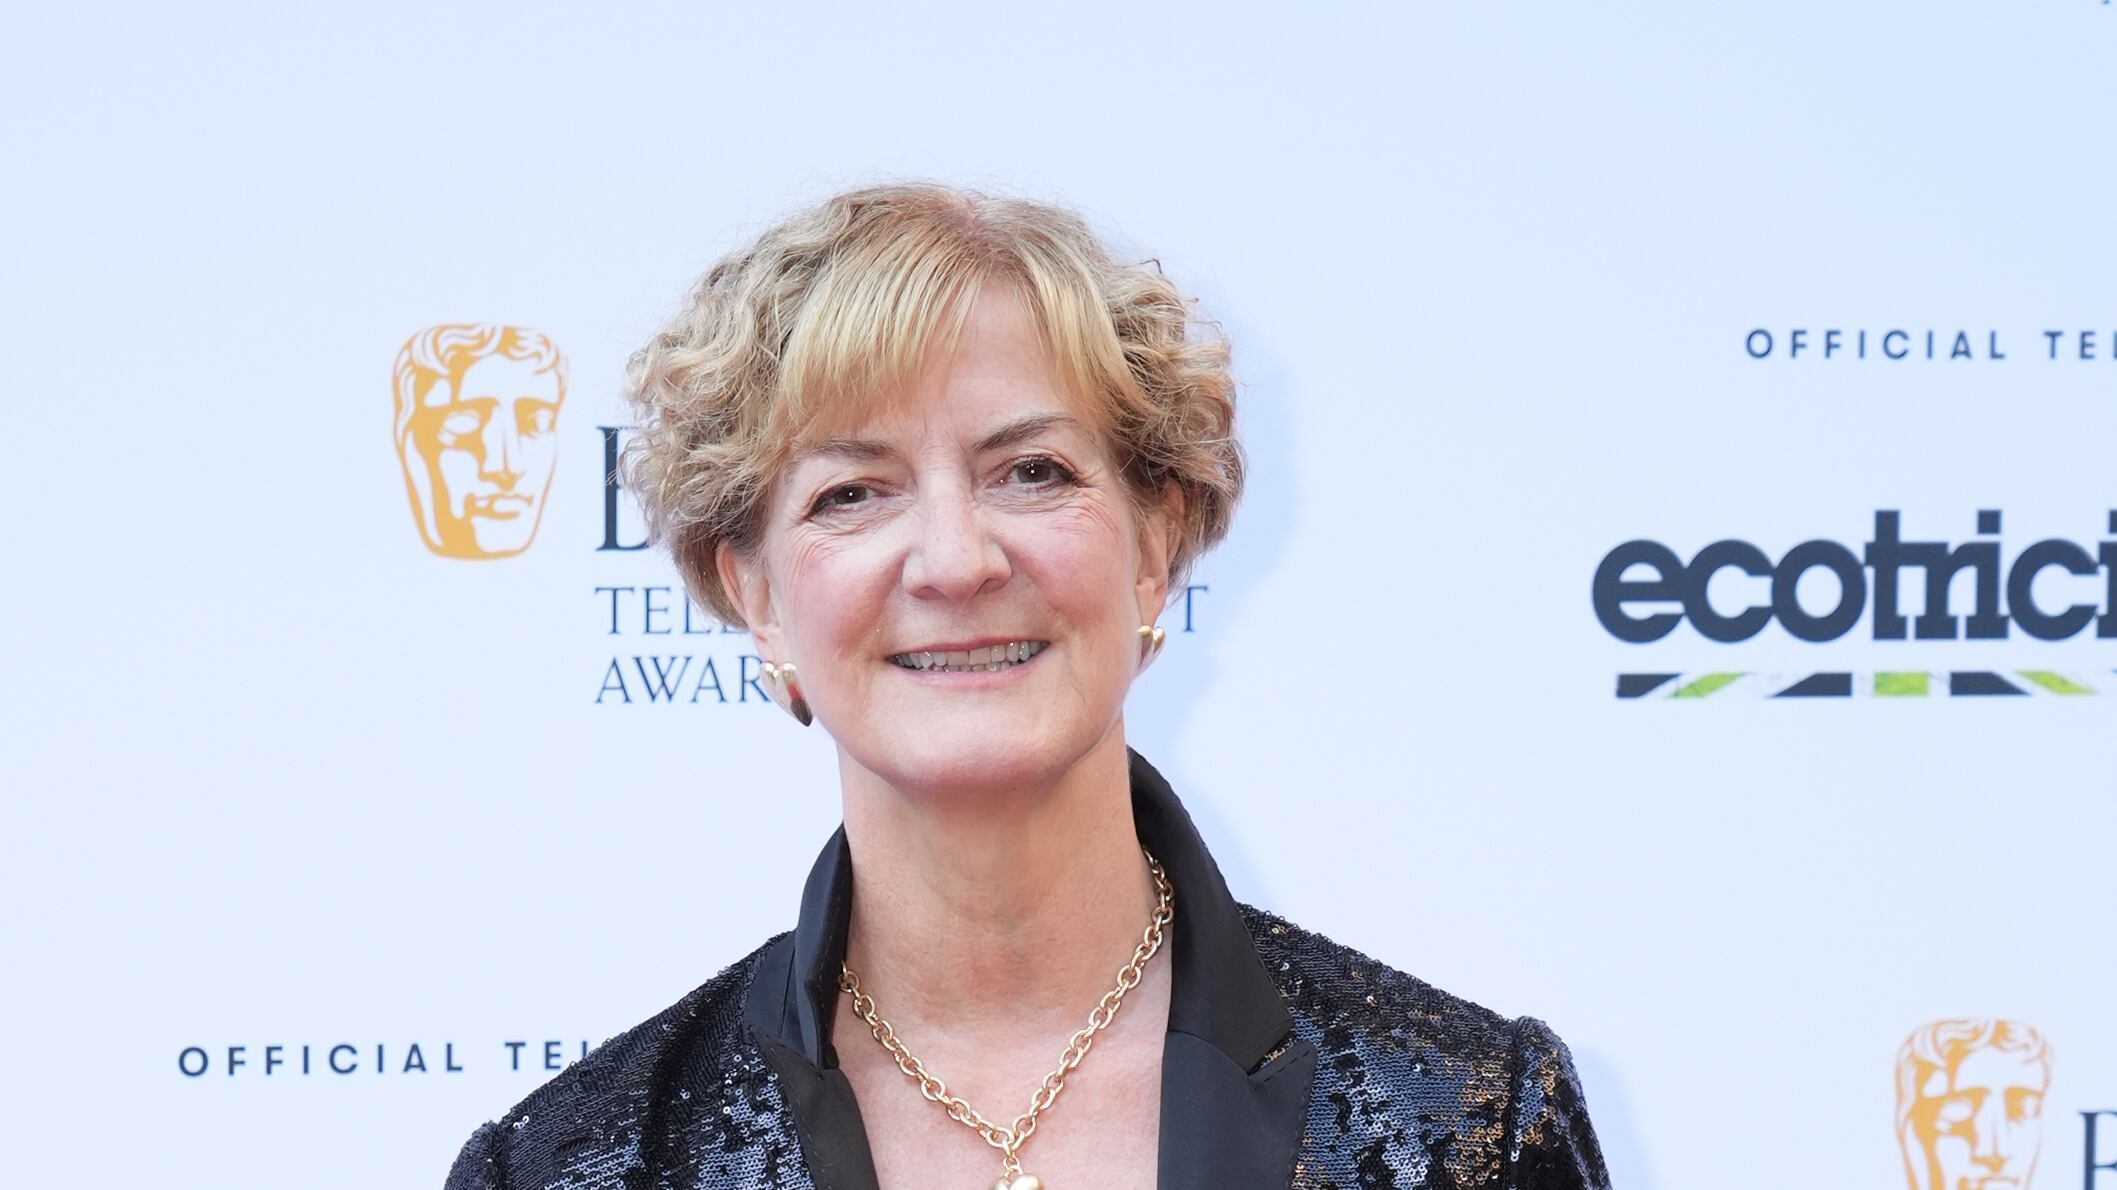 Sara Putt has praised the ‘huge amount of talent’ coming from the UK’s television shows